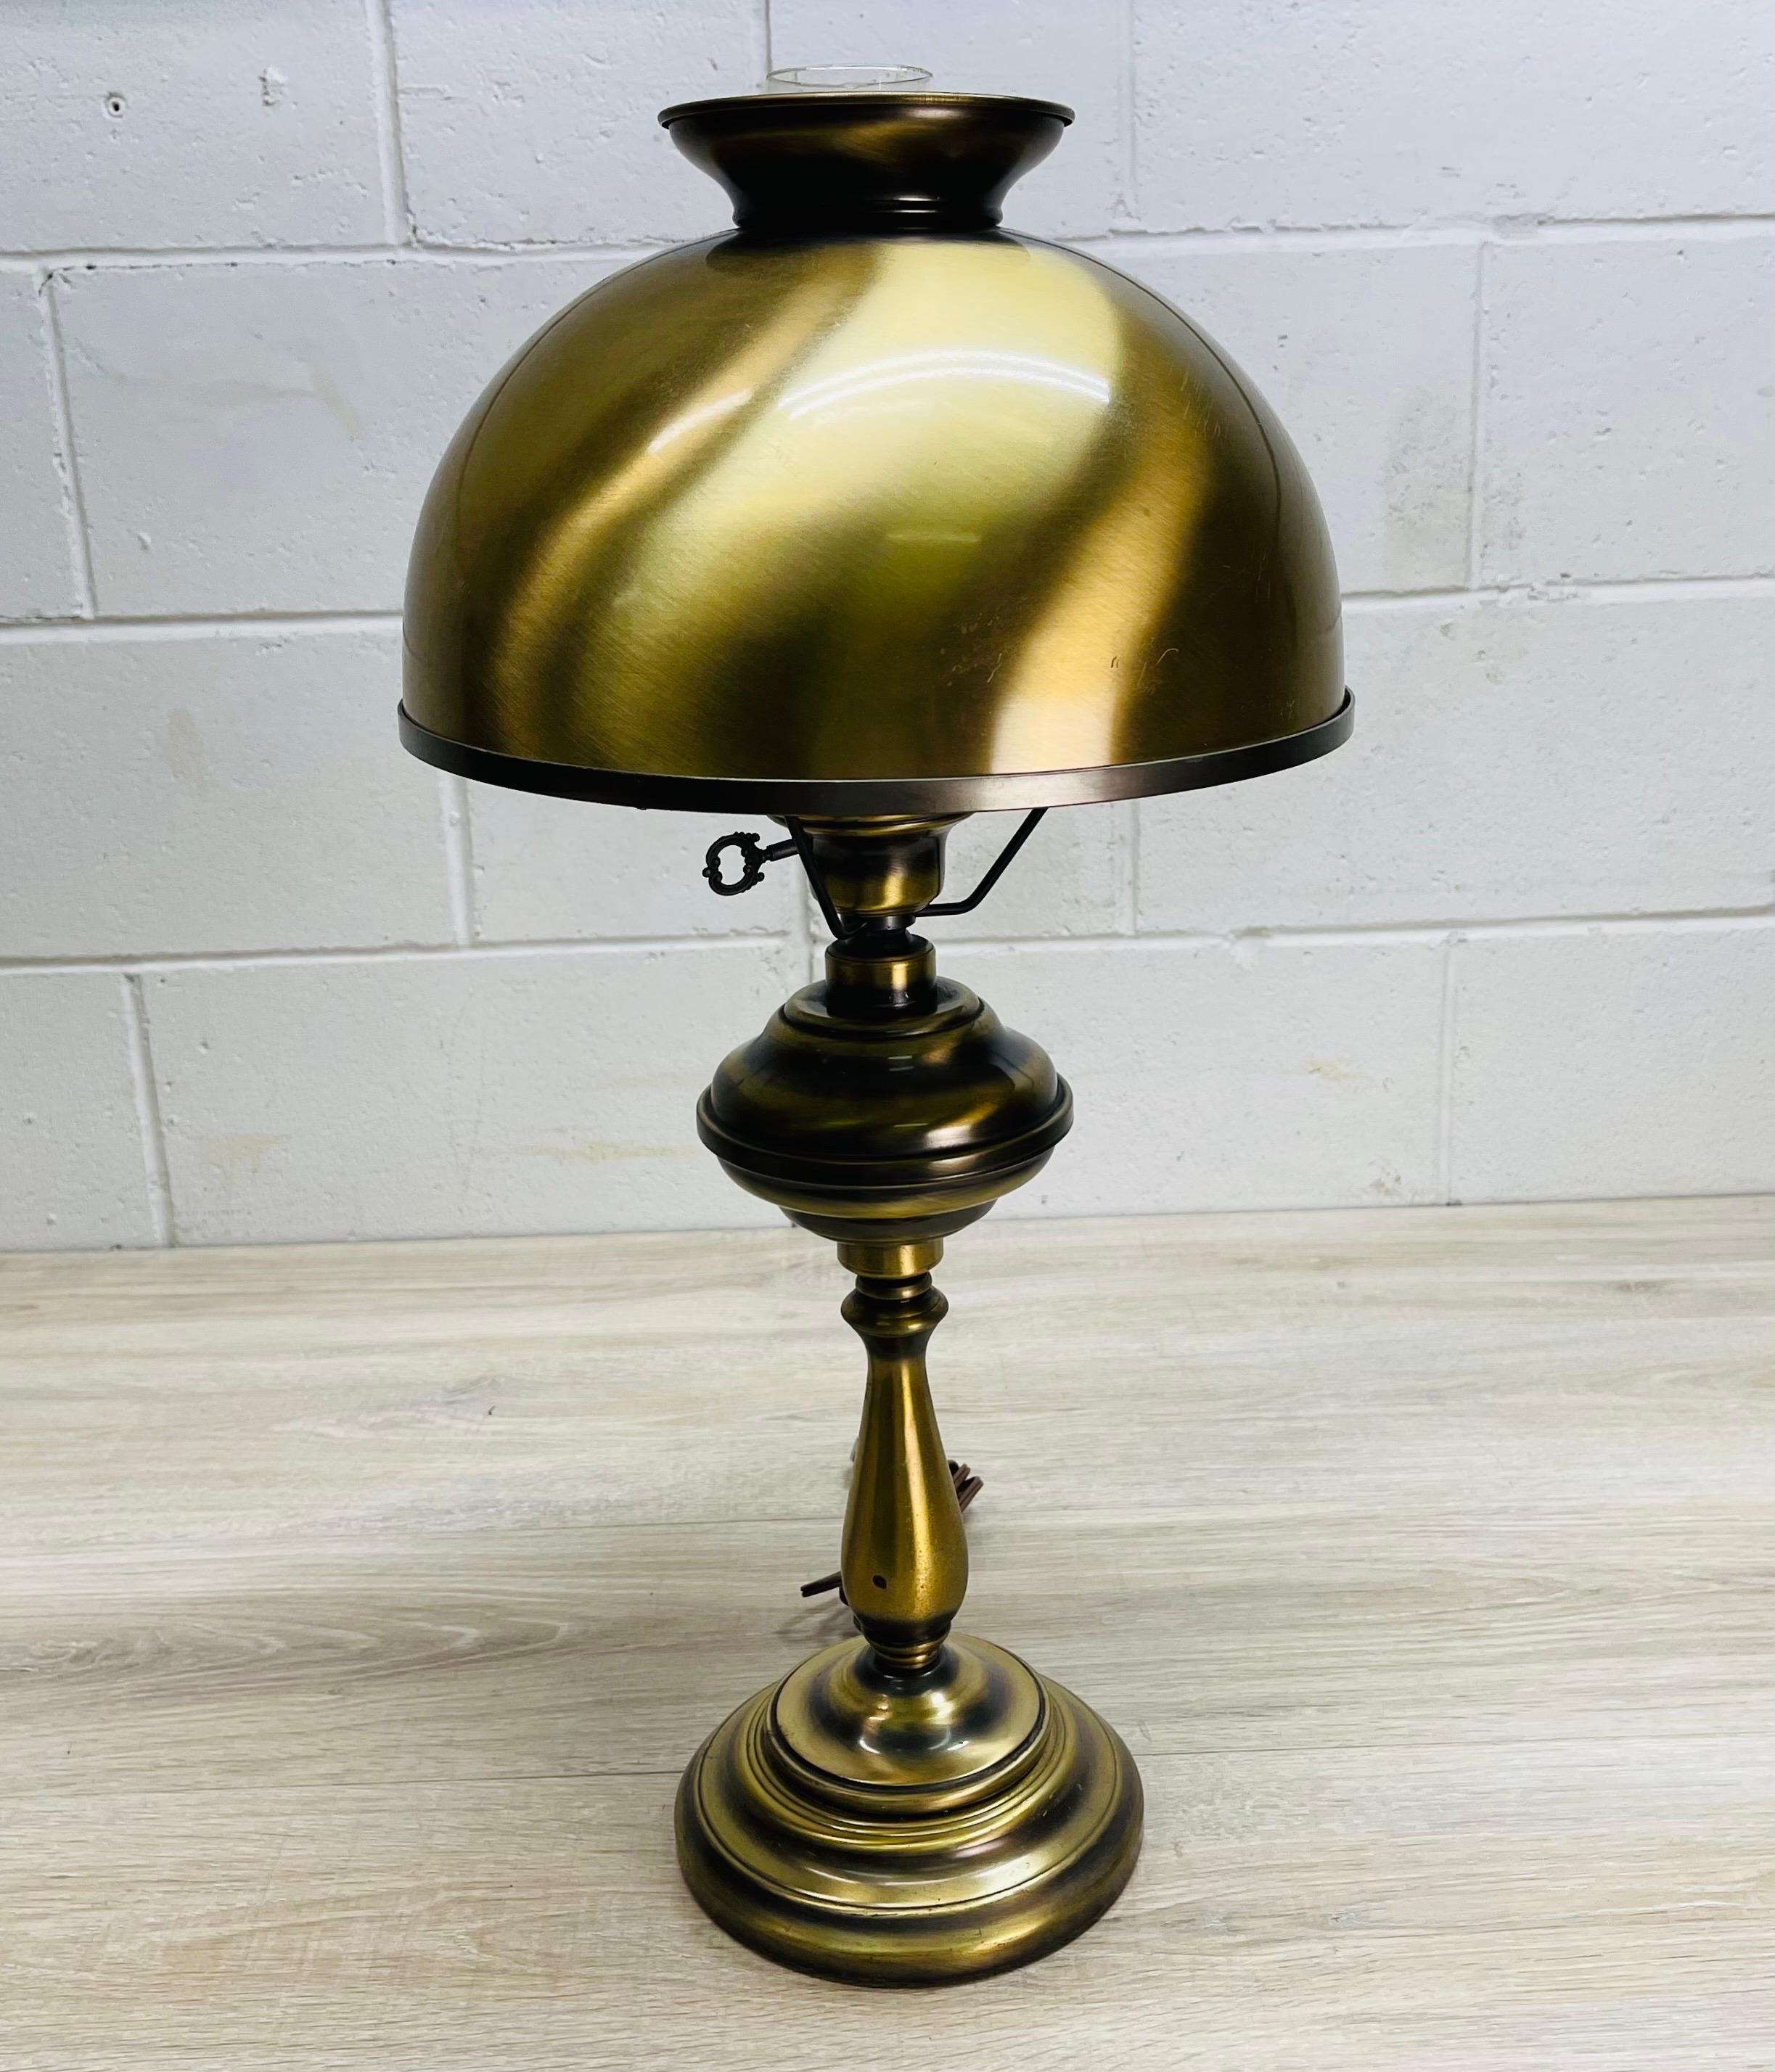 Vintage 1960s brushed brass round table lamp. The lamp comes with the metal shade and glass chimney. Wired for the US and in working condition. Uses a standard 100W bulb. Shade does have two small dents in the metal but can be used in the back of